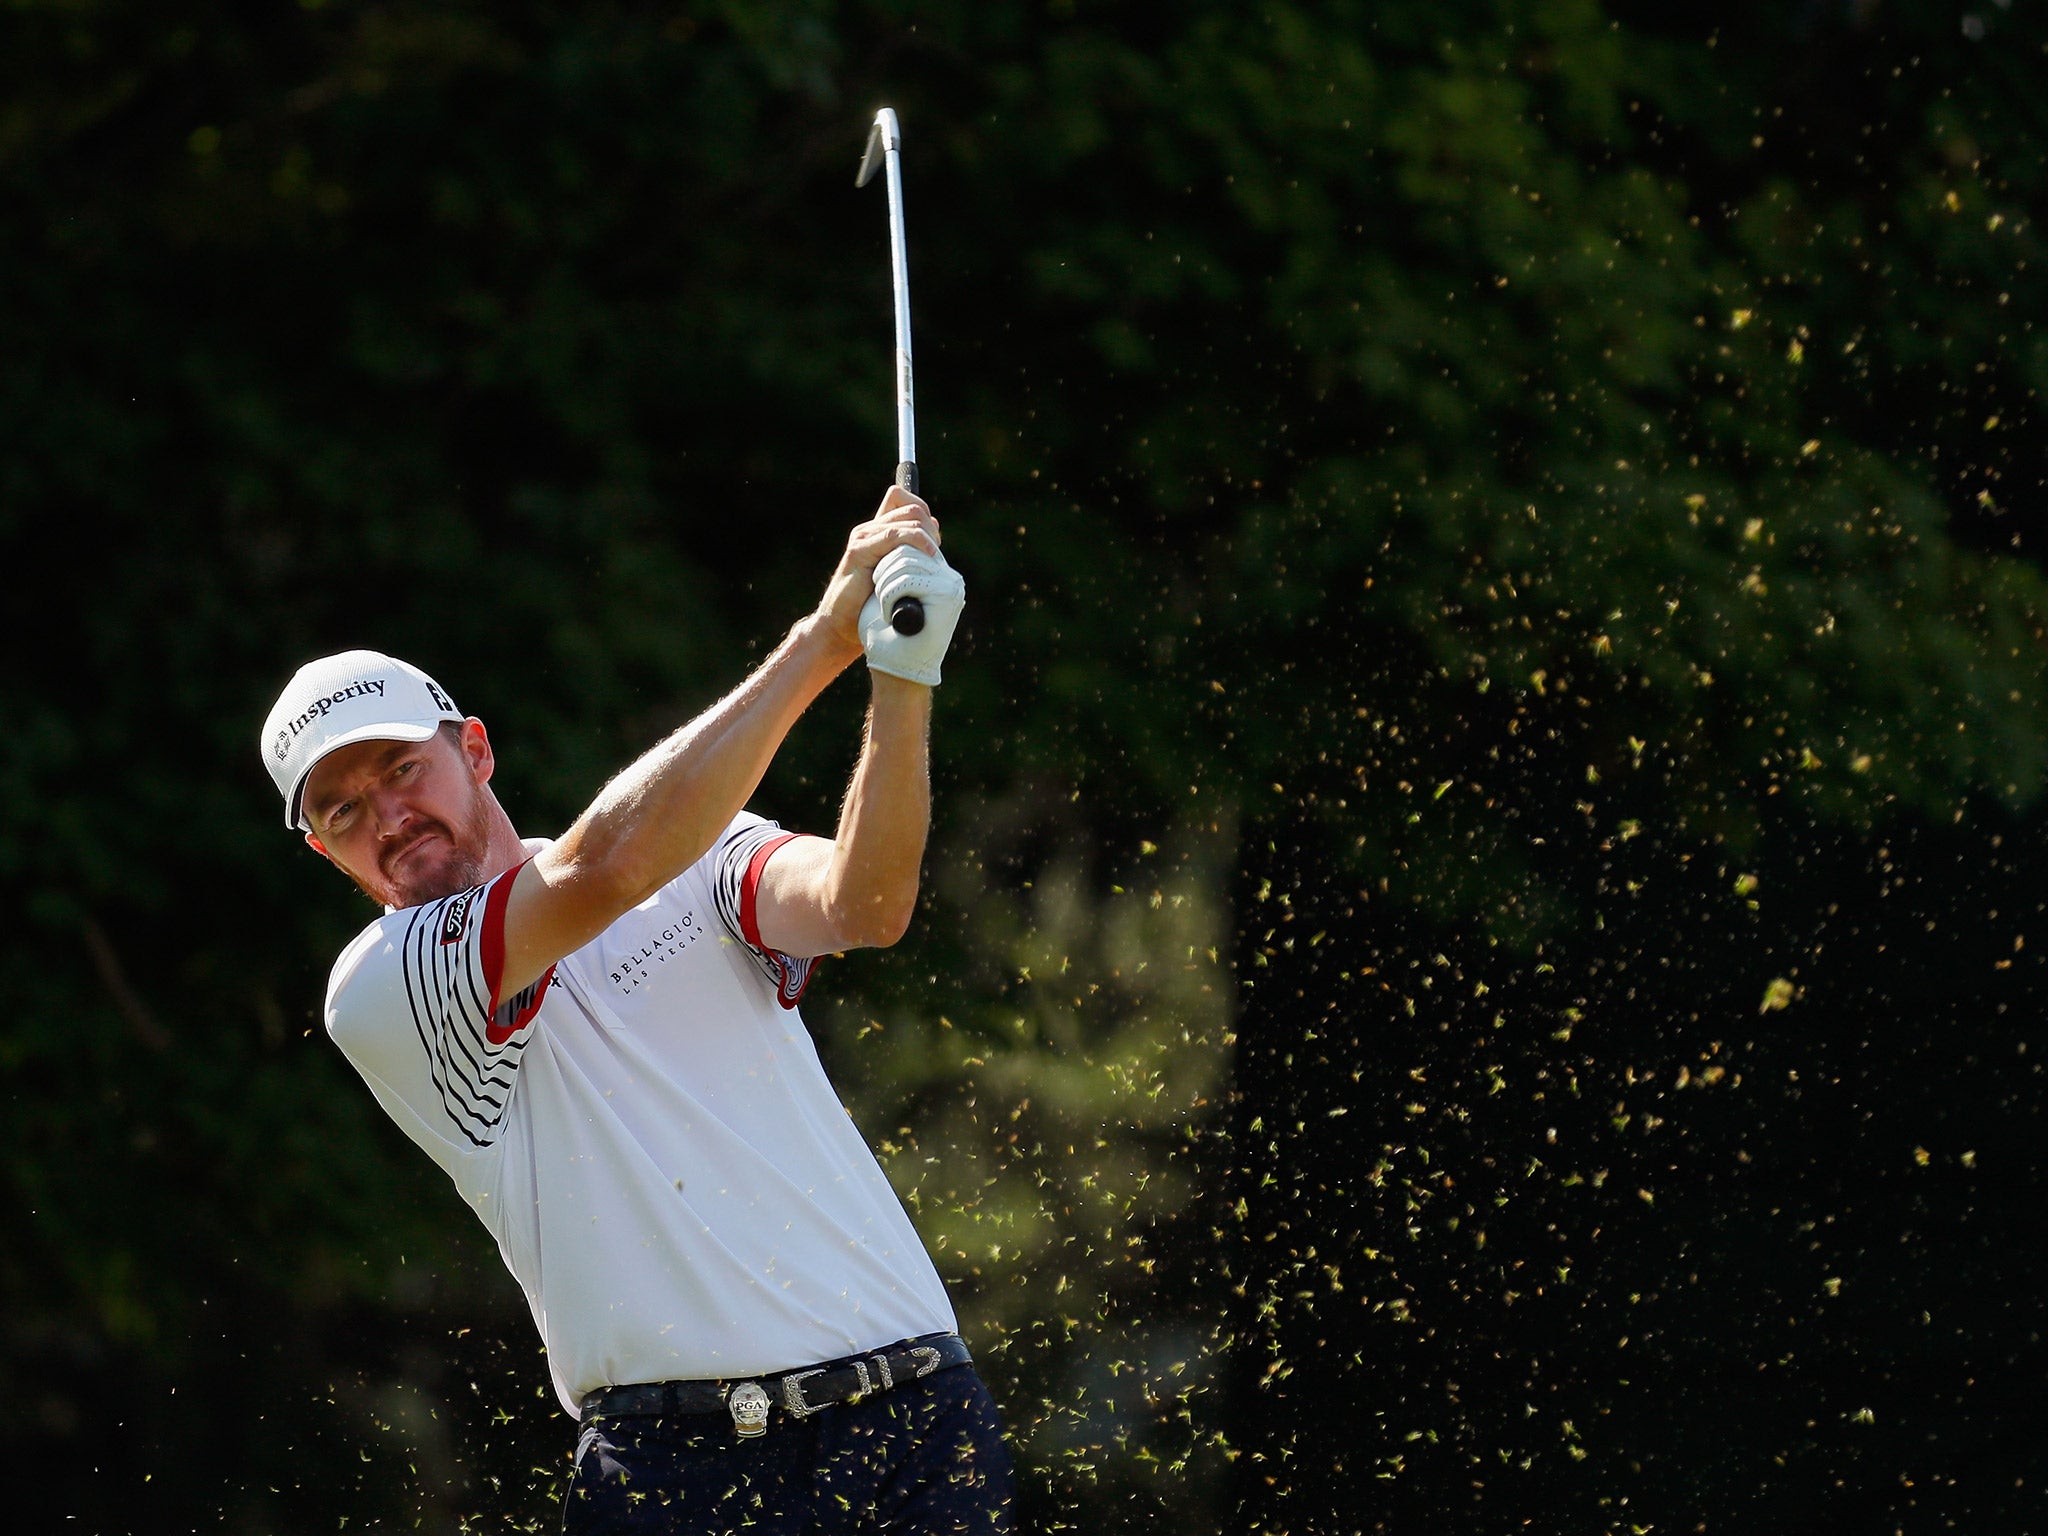 Jimmy Walker has held the lead at the end of the first and second rounds at the PGA Championship